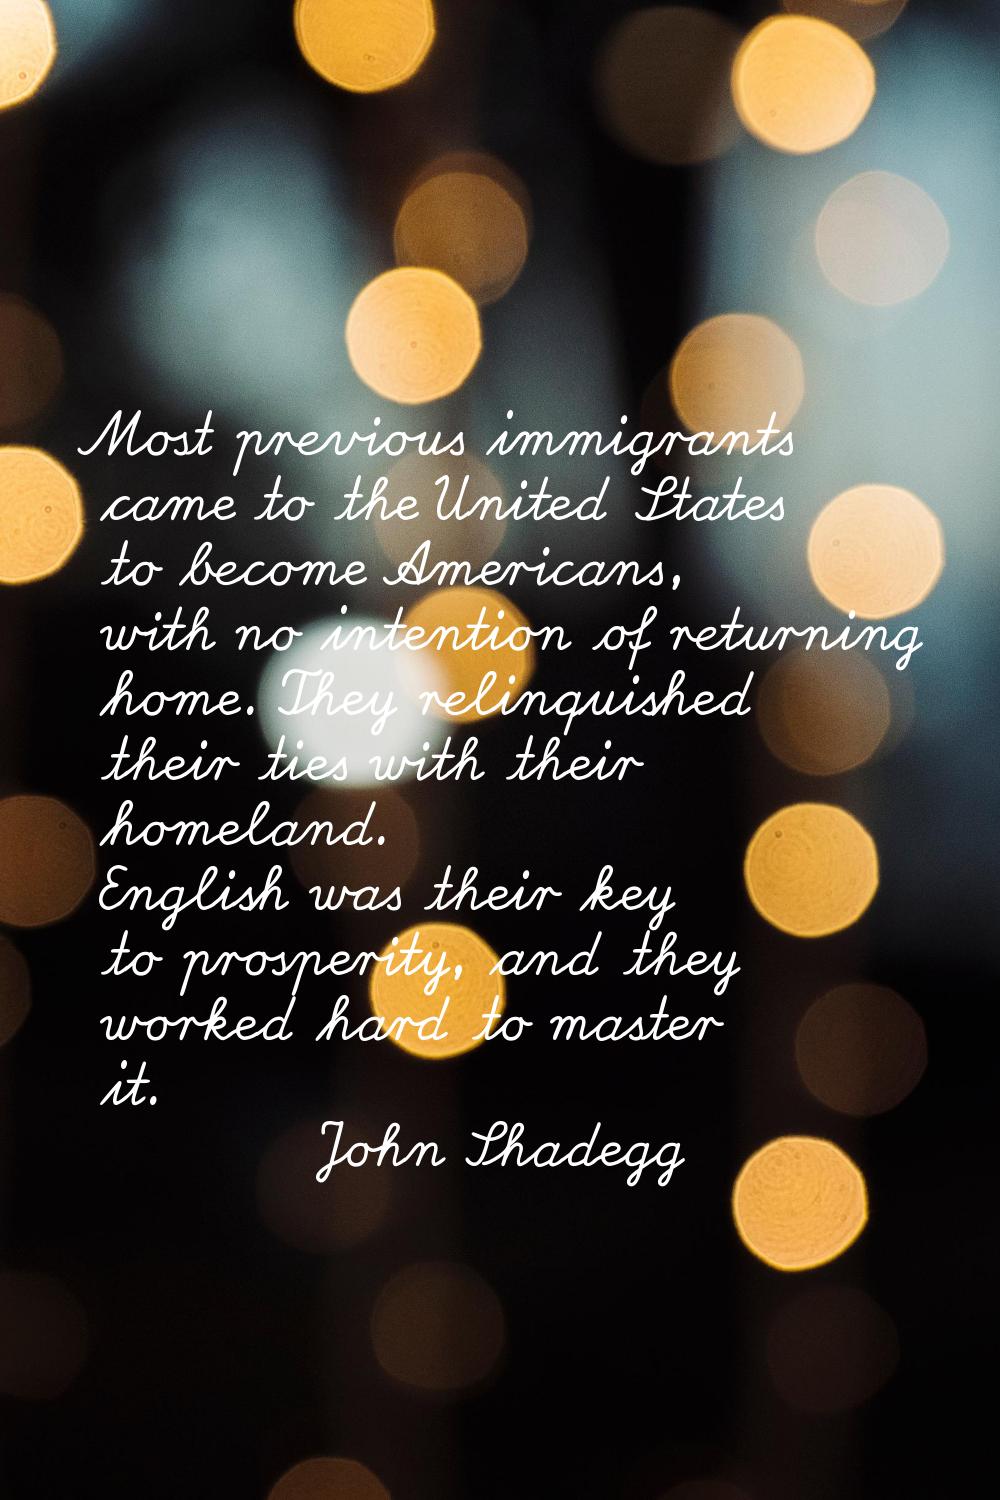 Most previous immigrants came to the United States to become Americans, with no intention of return